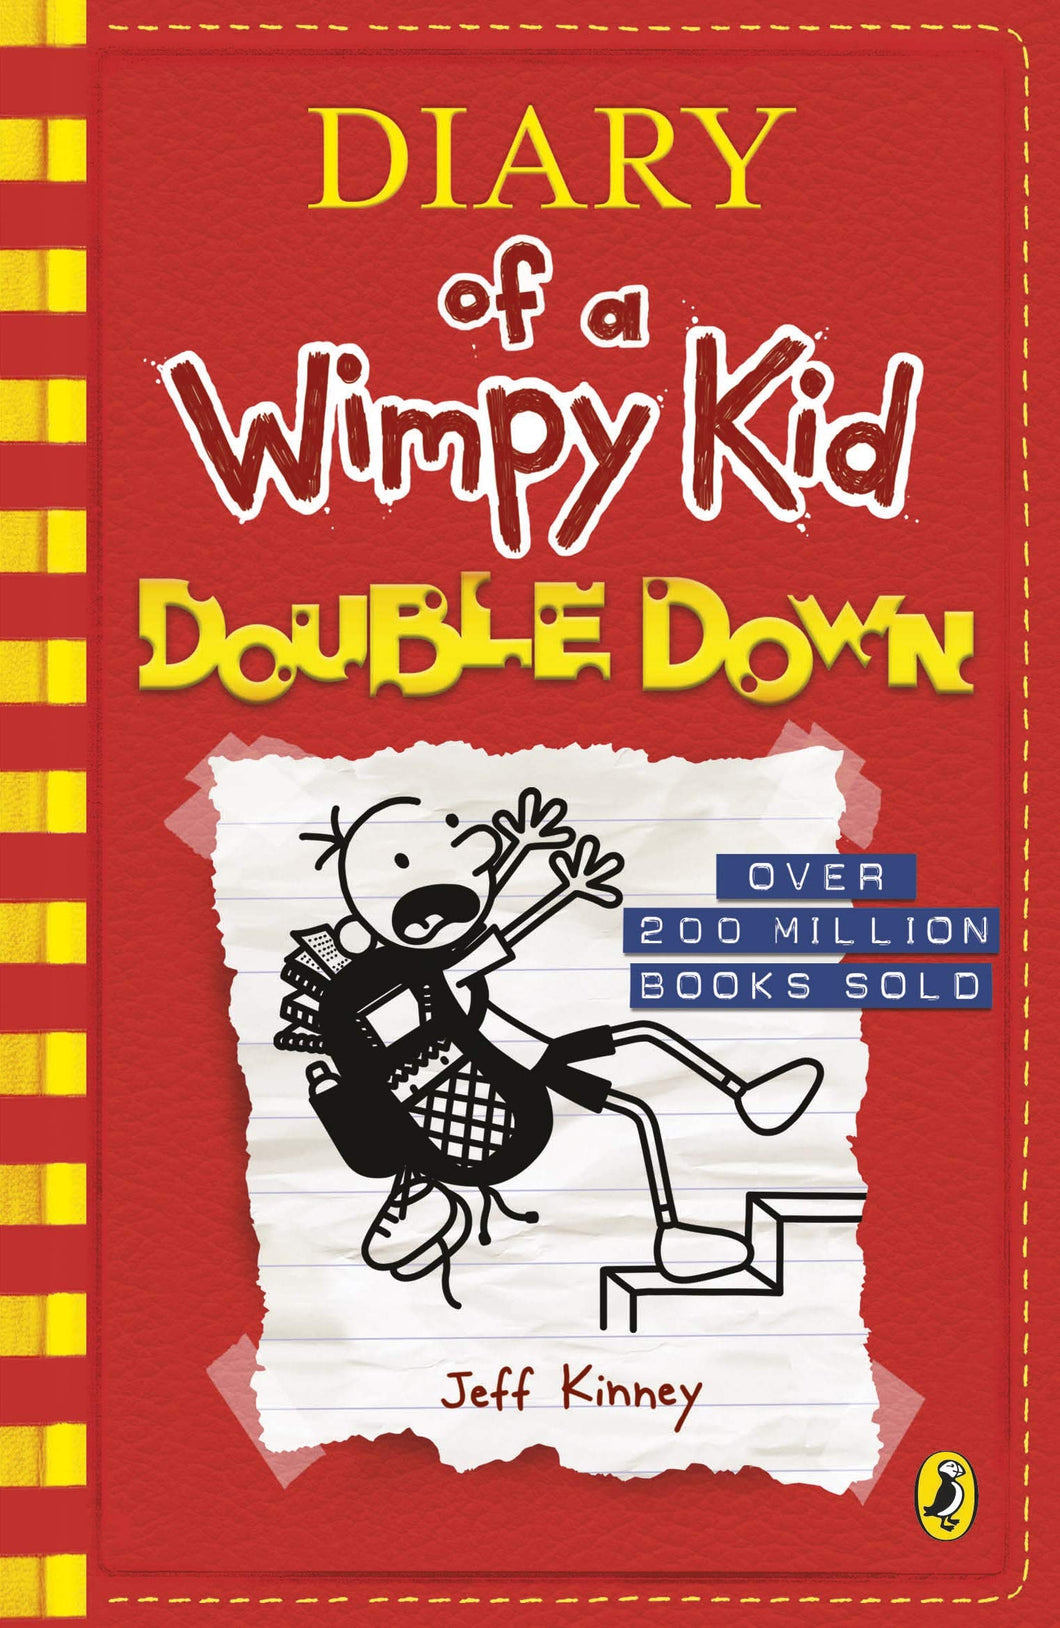 Diary of a Wimpy Kid: Double Down (#11)